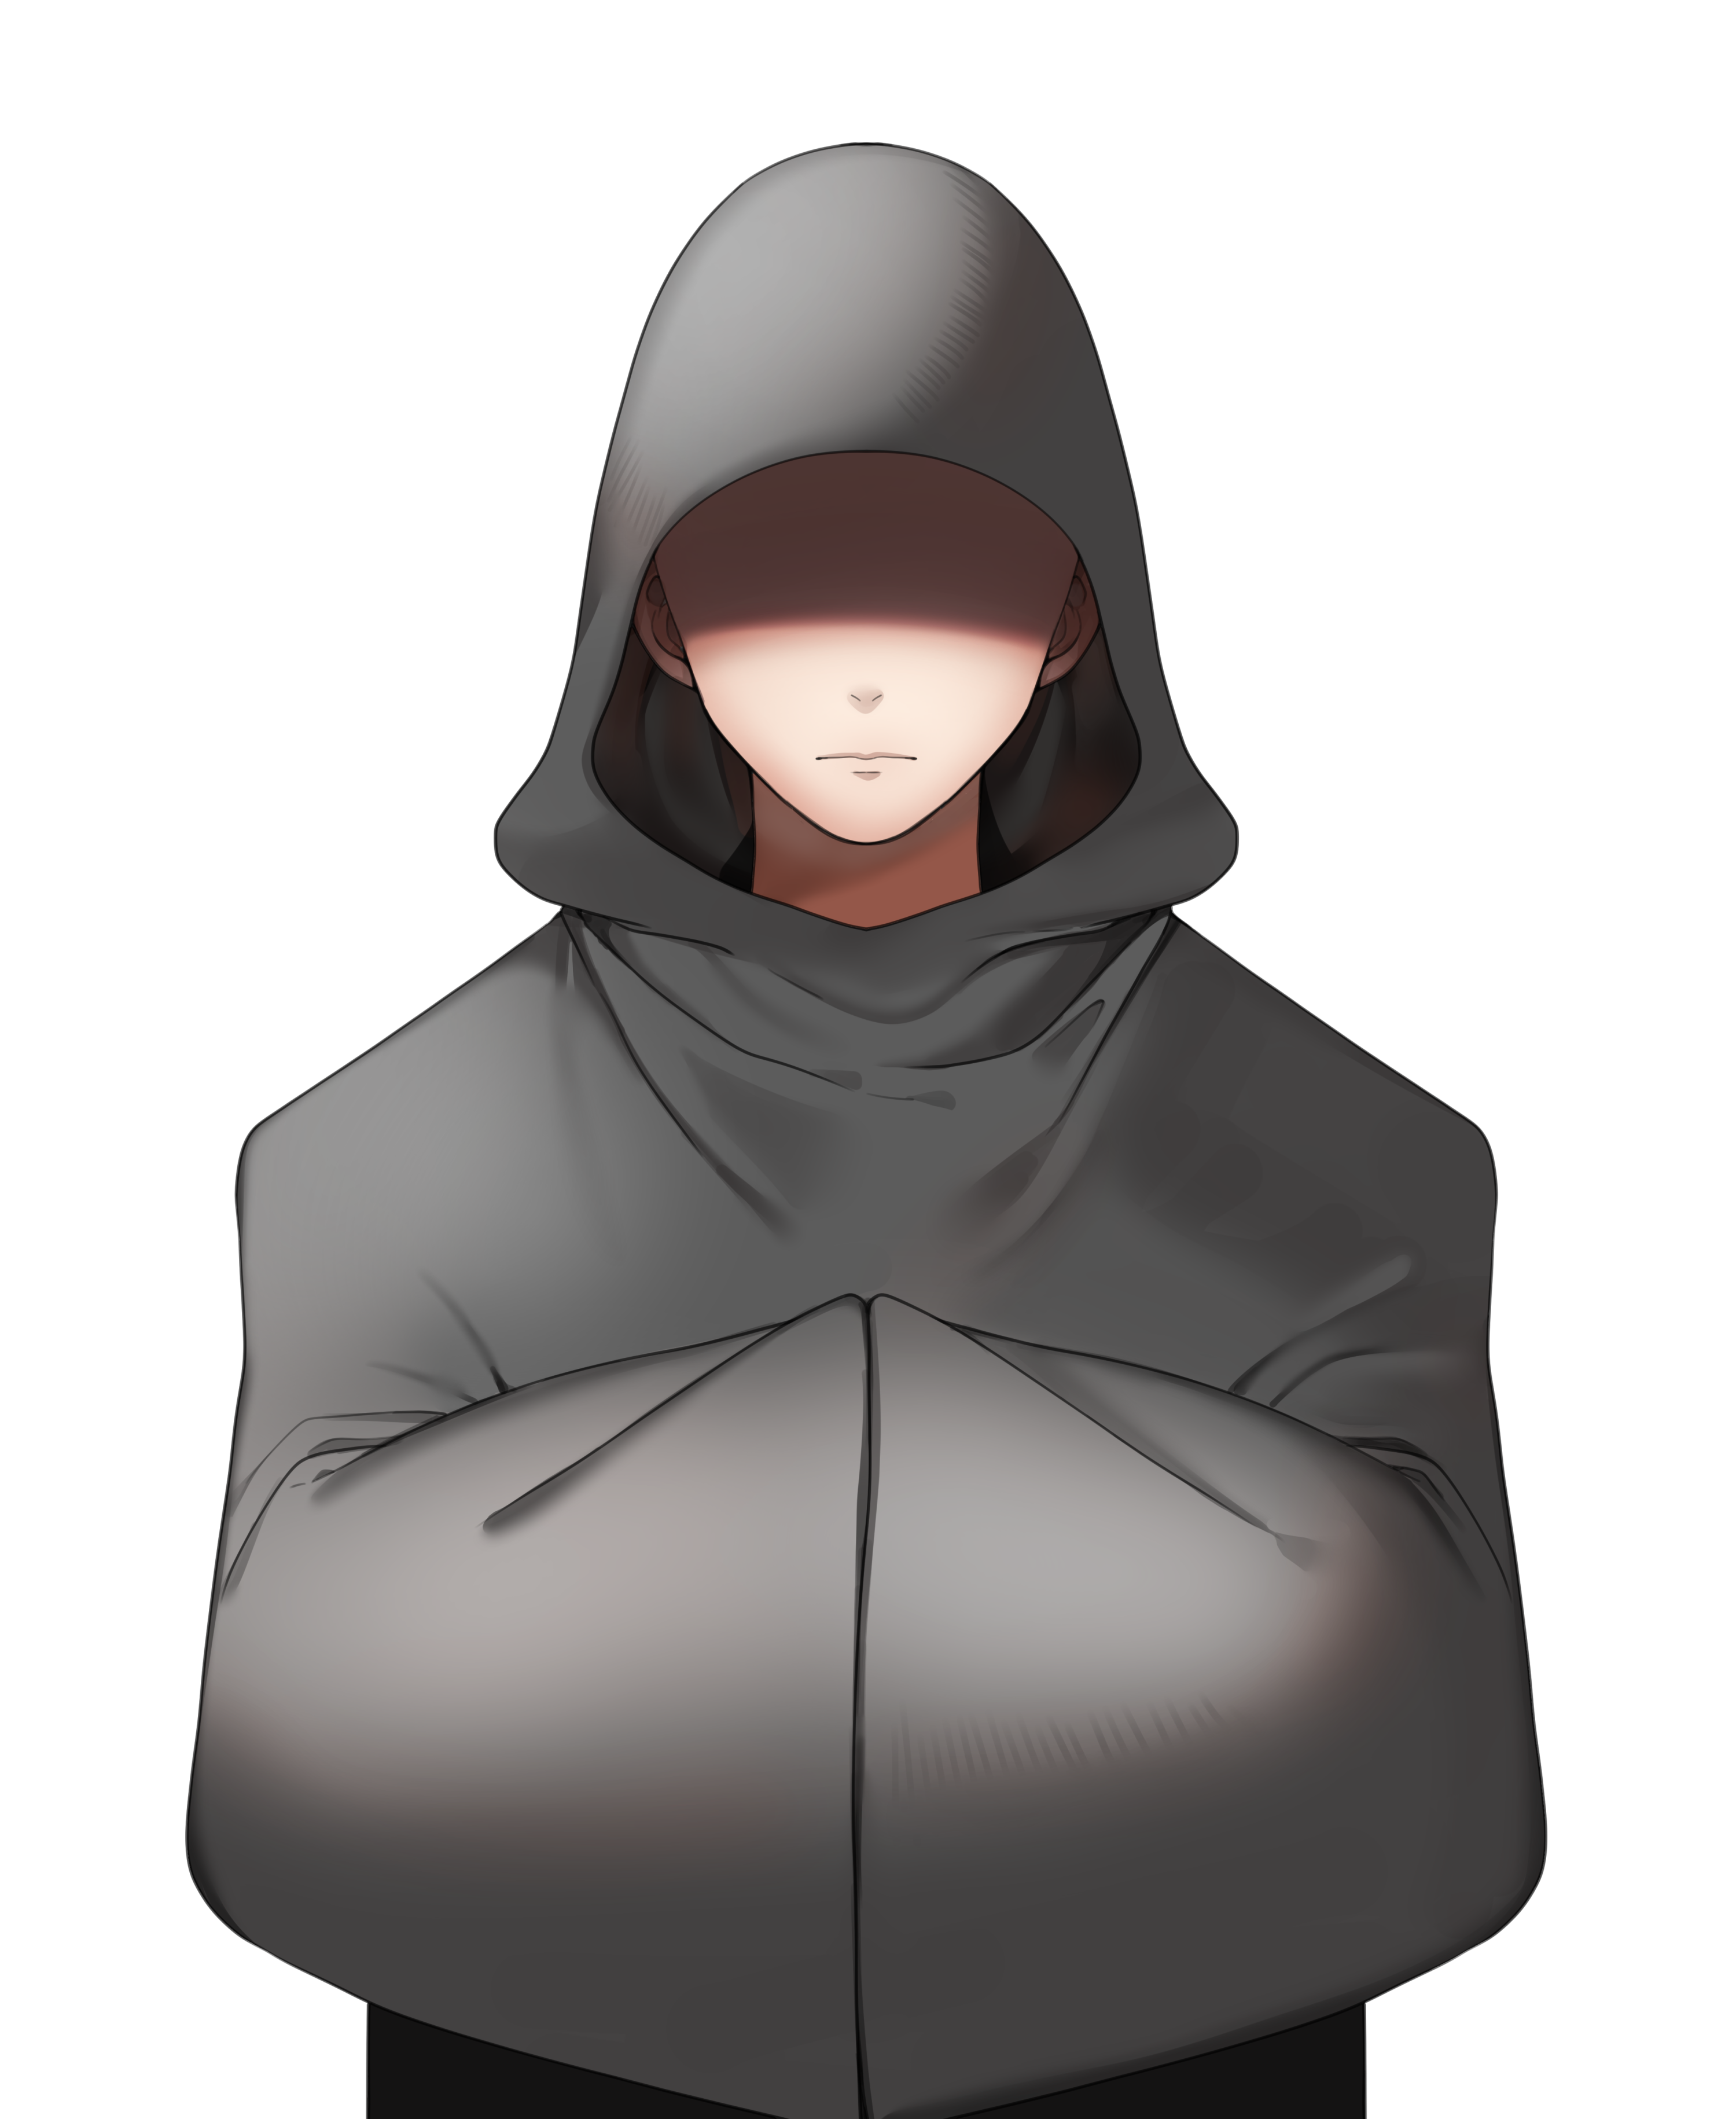 An image of acharacter The Many Deaths of Lily Kosen. They are wearing a hood and robes, and not much can be seen of them.